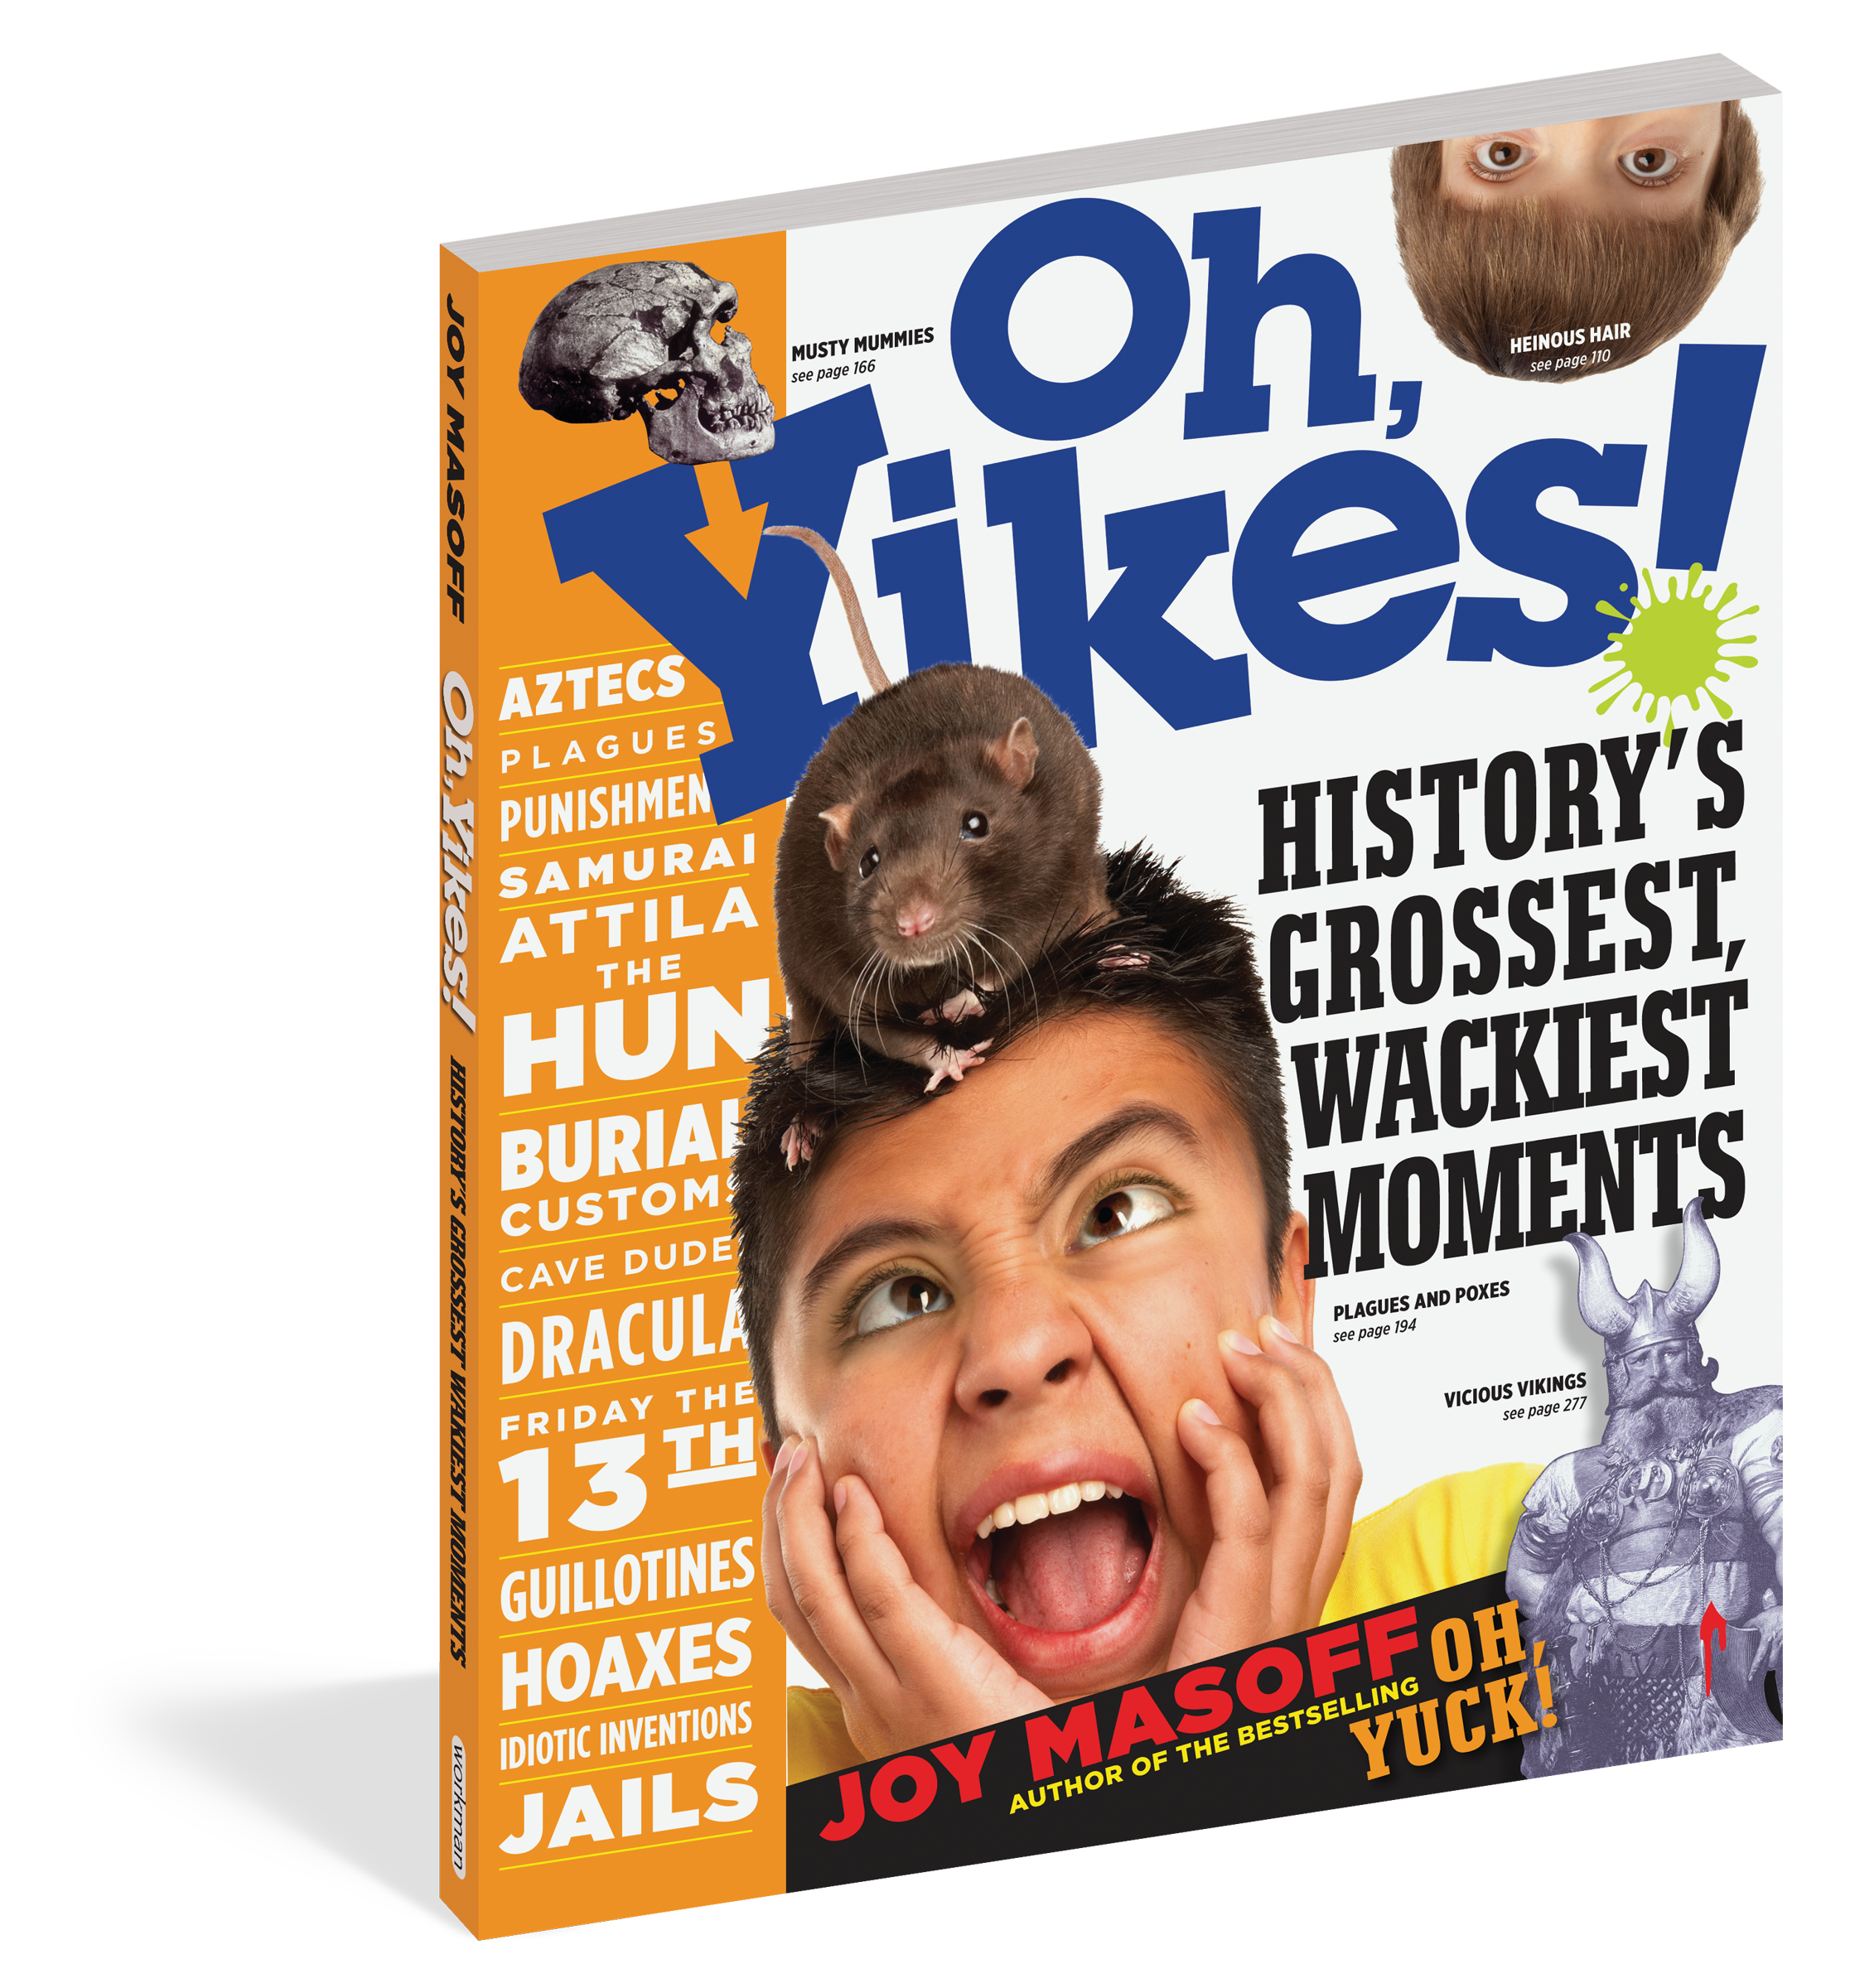 Oh, Yikes! - History's Grossest,Wackiest Moments    